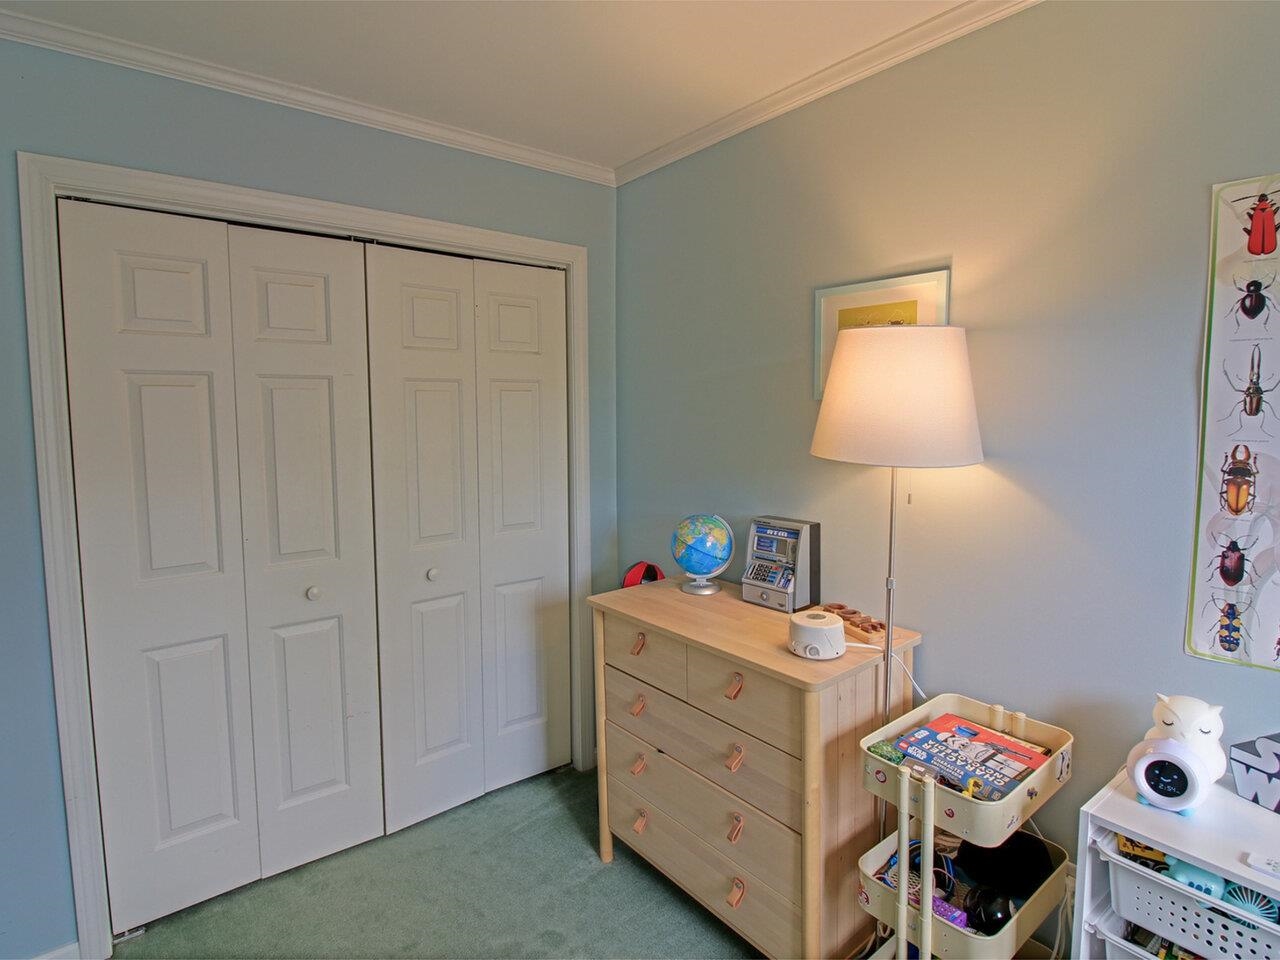 With Spacious Closets